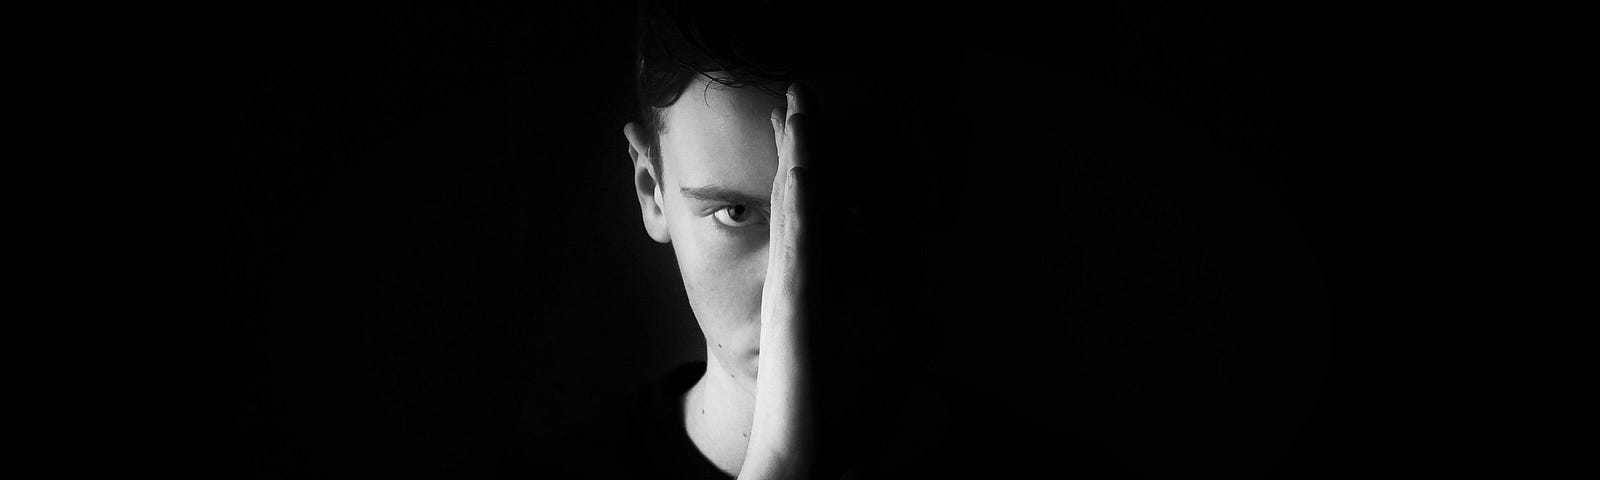 Whitesplaining goes on hiatus. A black and white photo of a young, dark-haired, white man facing forward, holding his hand up which divides his face equally in half. One side is in fully lit while the other half cannot be seen at all because its in complete darkness.